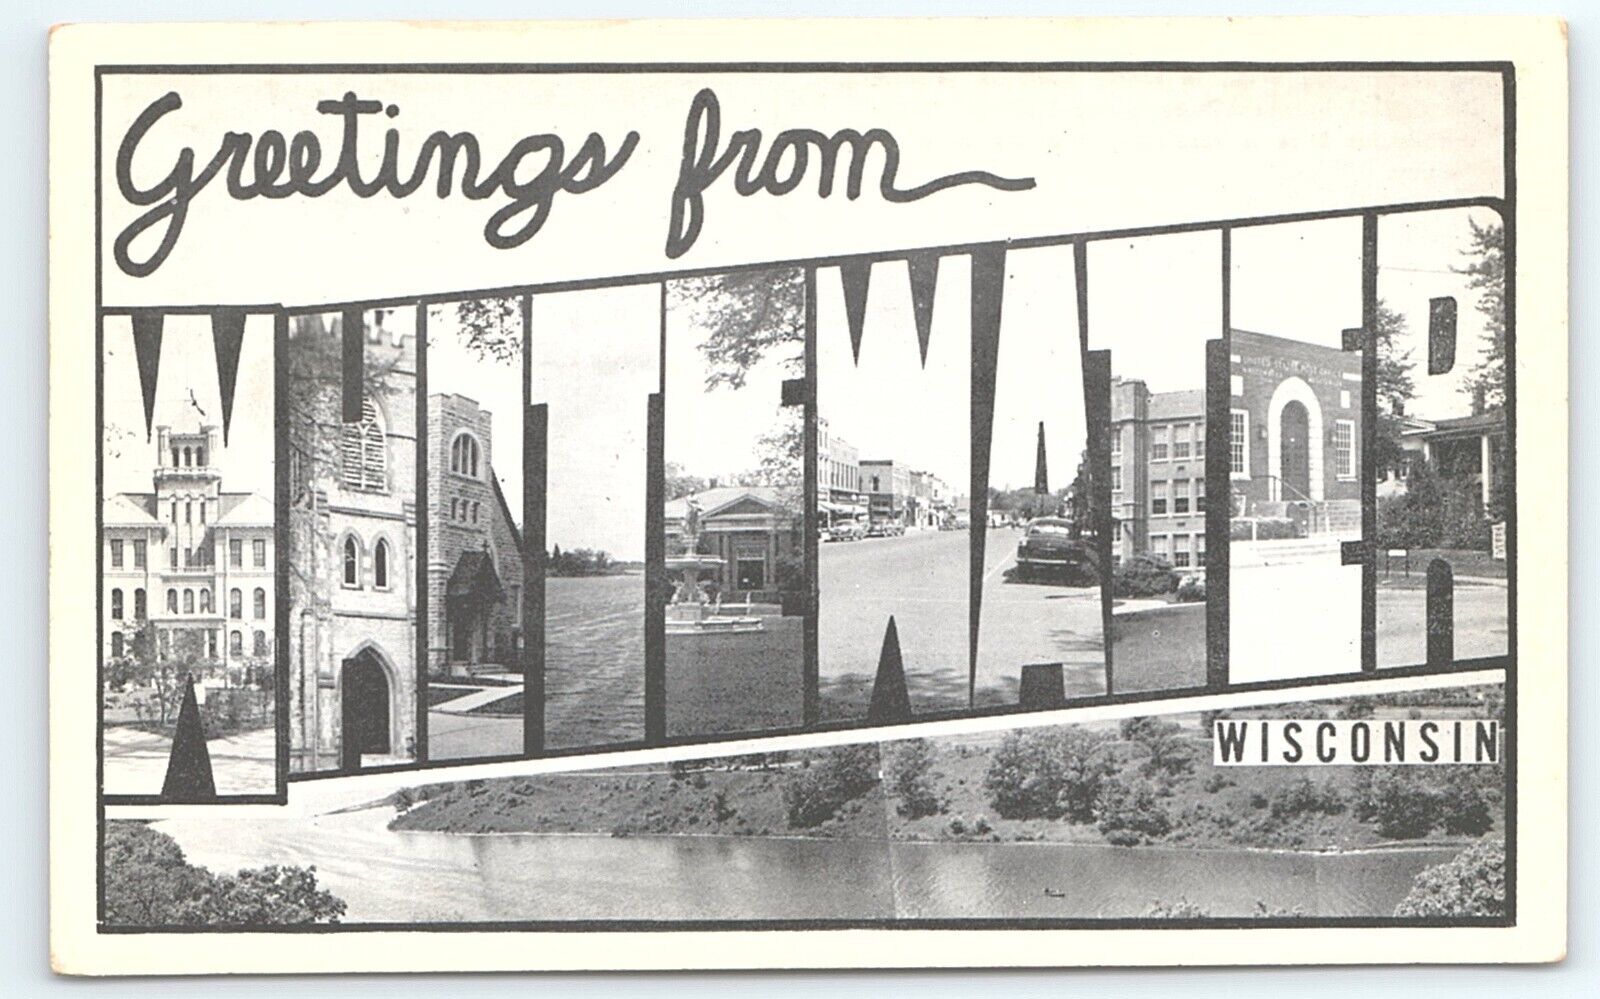 Postcard Greetings from Whitewater Wisconsin c1950s